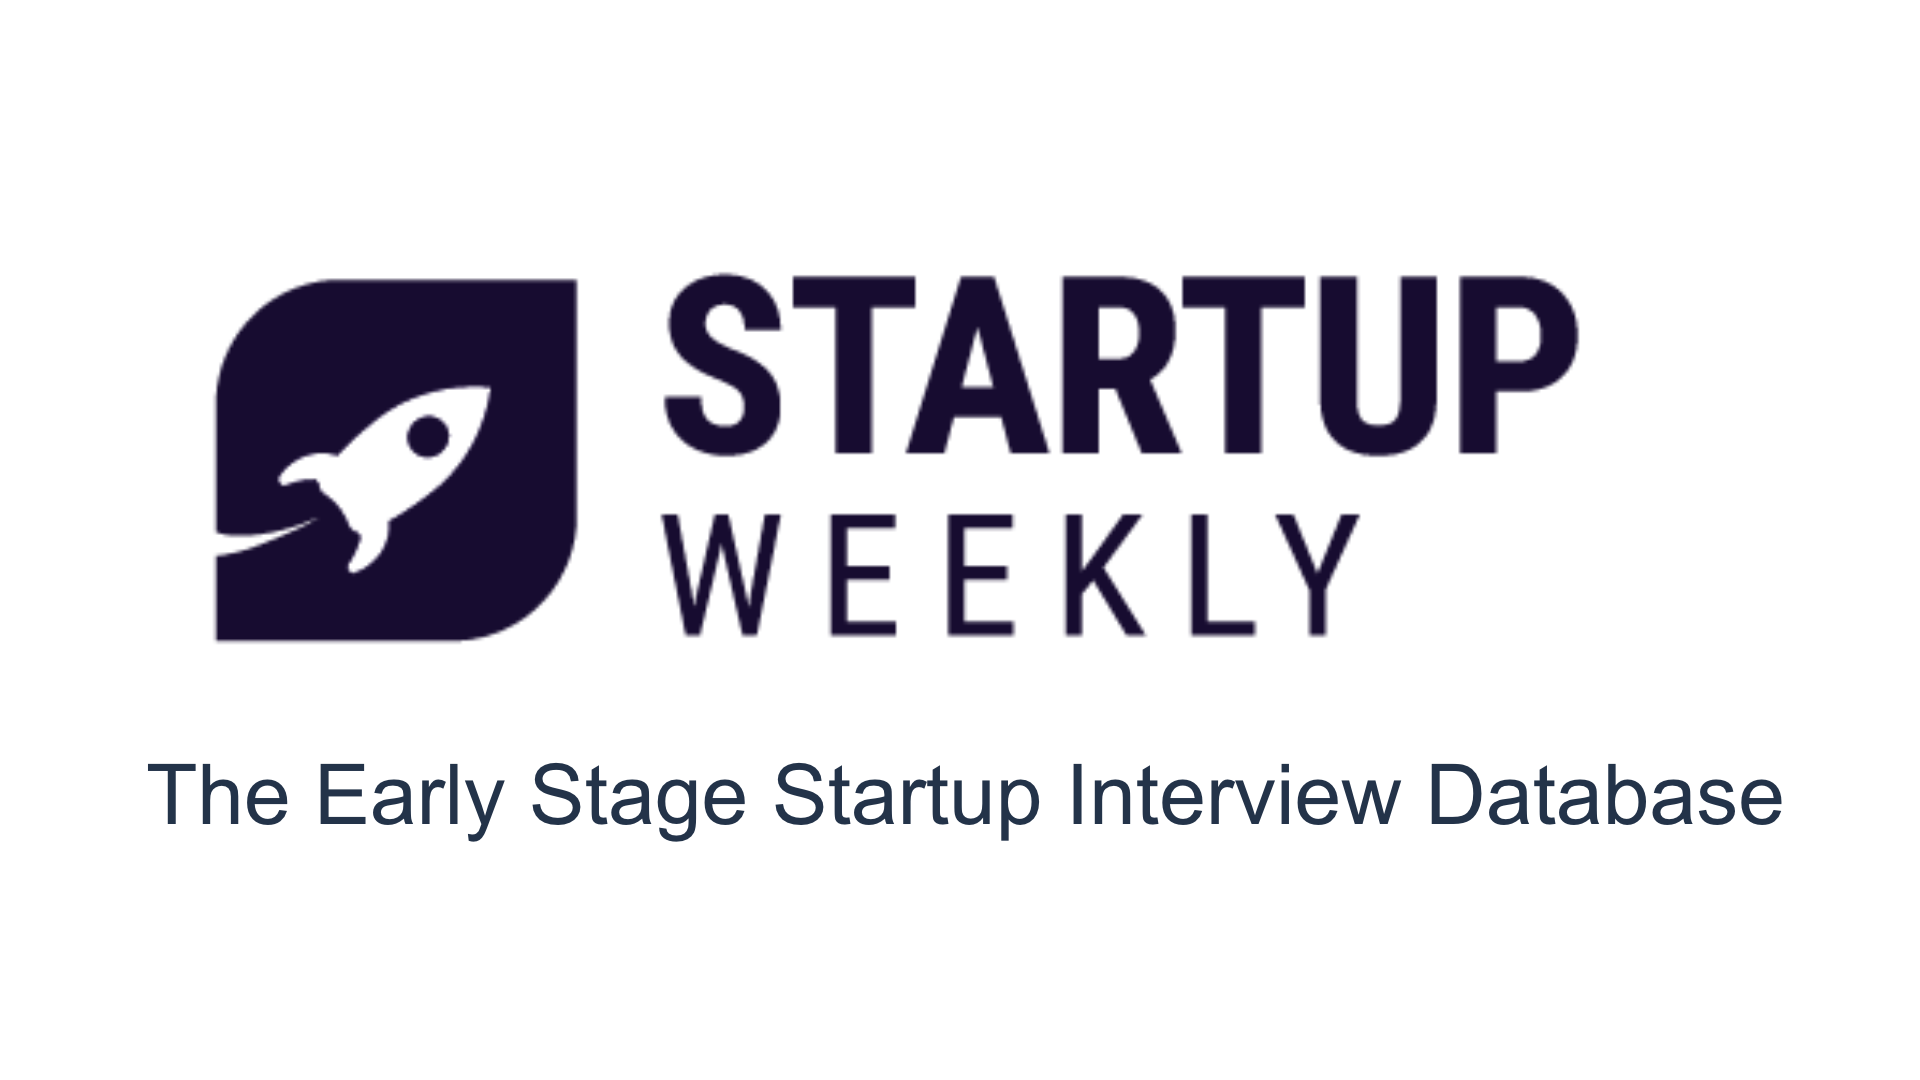 Startup Weekly